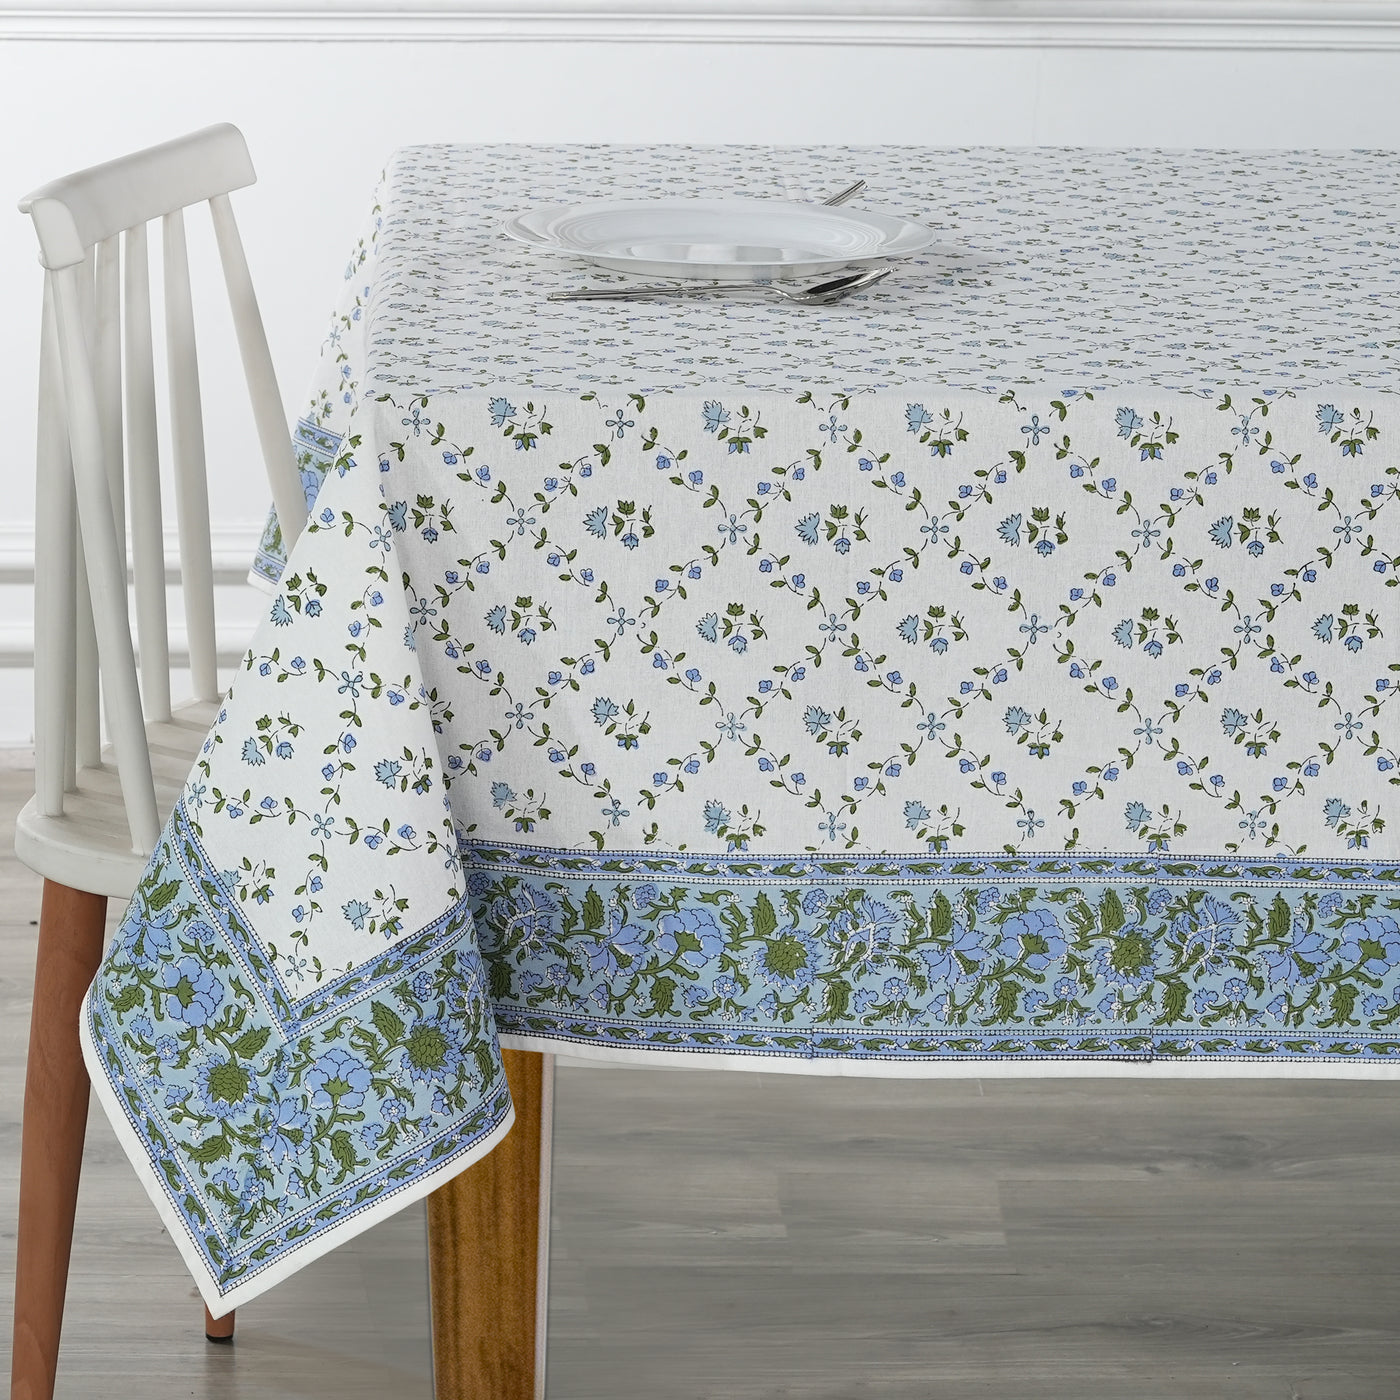 Fabricrush Powder Blue Indian Hand Block Floral Printed Cotton Table Cover, Table Top, French Tablecloth